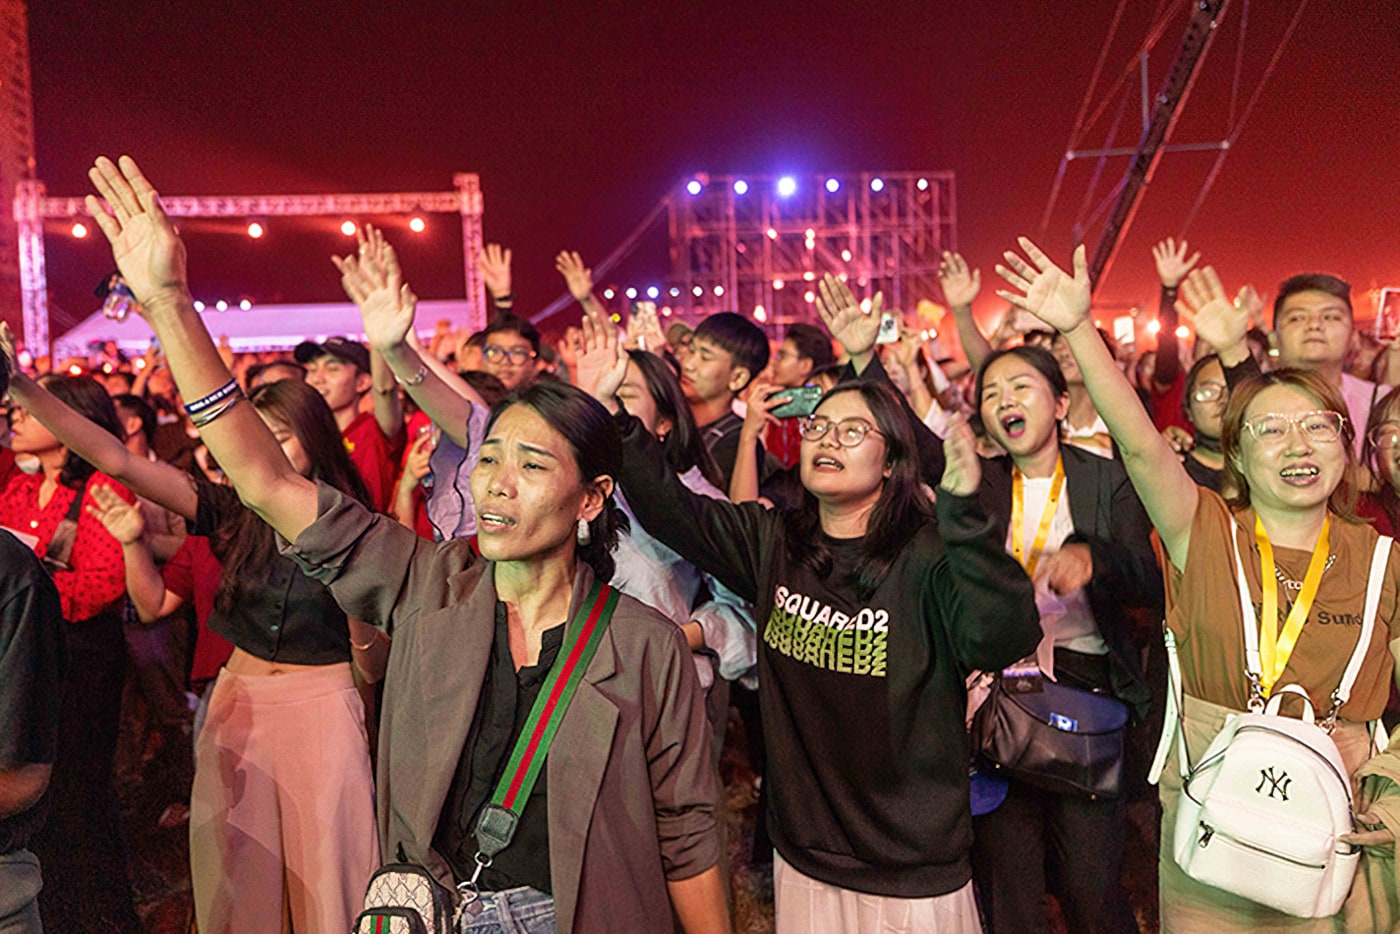 Tens of thousands heard Franklin Graham preach the Good News of Jesus Christ in Ho Chi Minh City, the largest city in Vietnam.